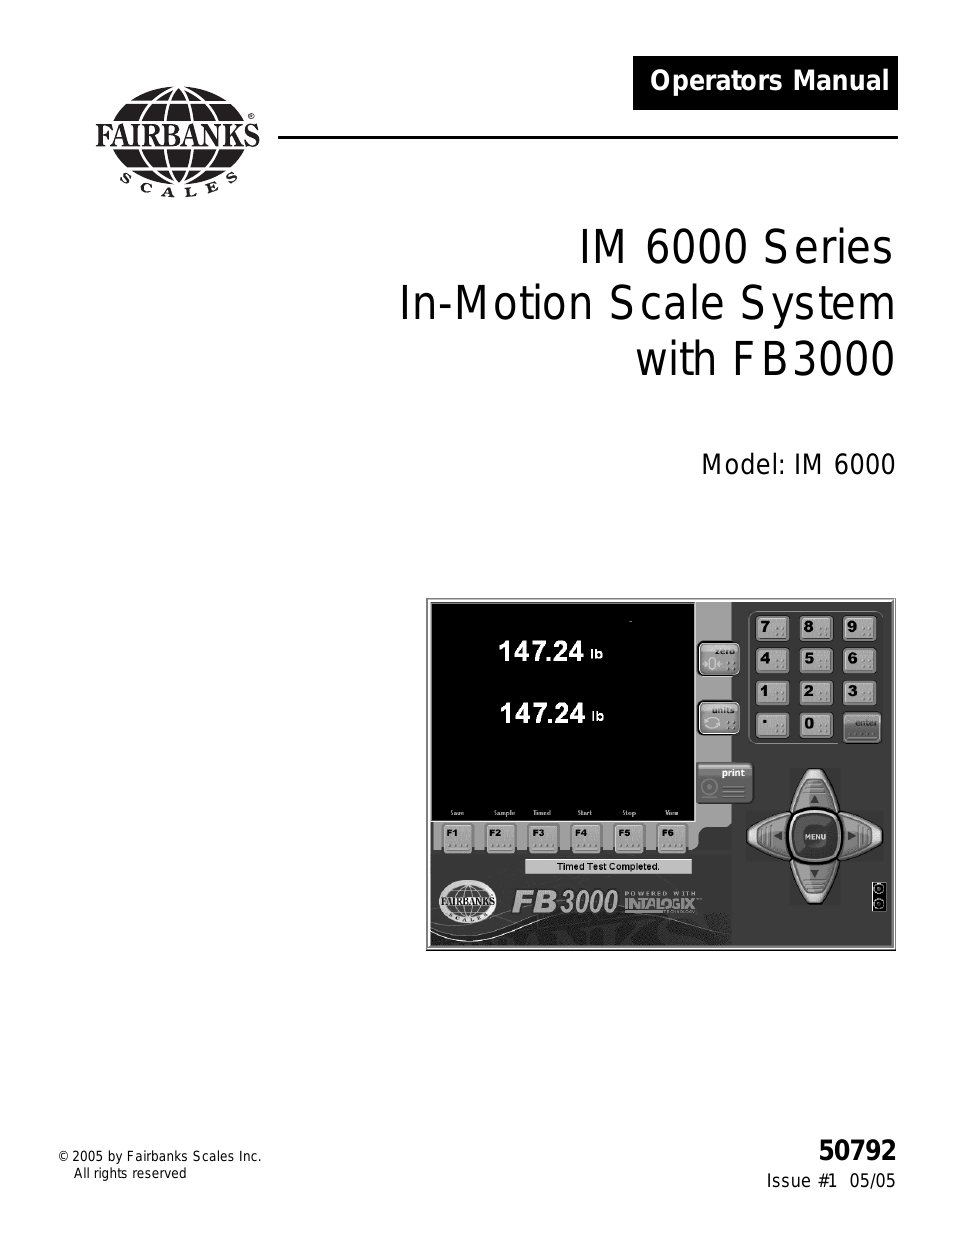 IM 6000 Series In-Motion Scale System with FB3000